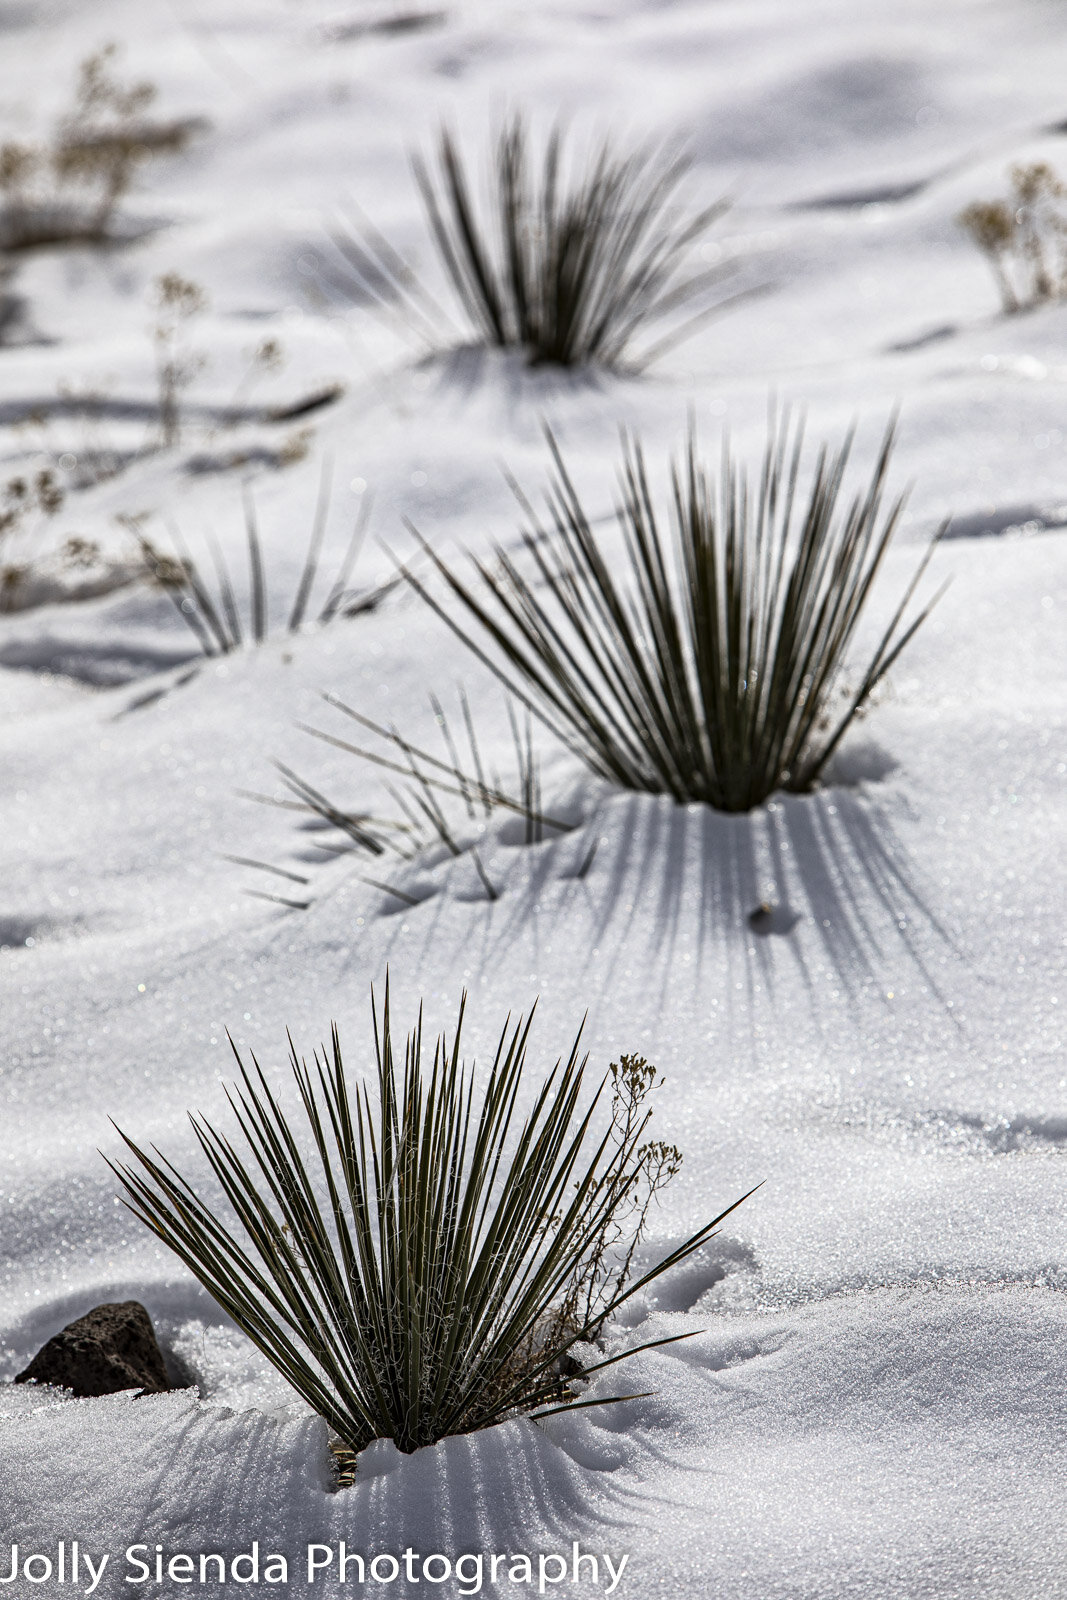 Trio of cactuses in the snow